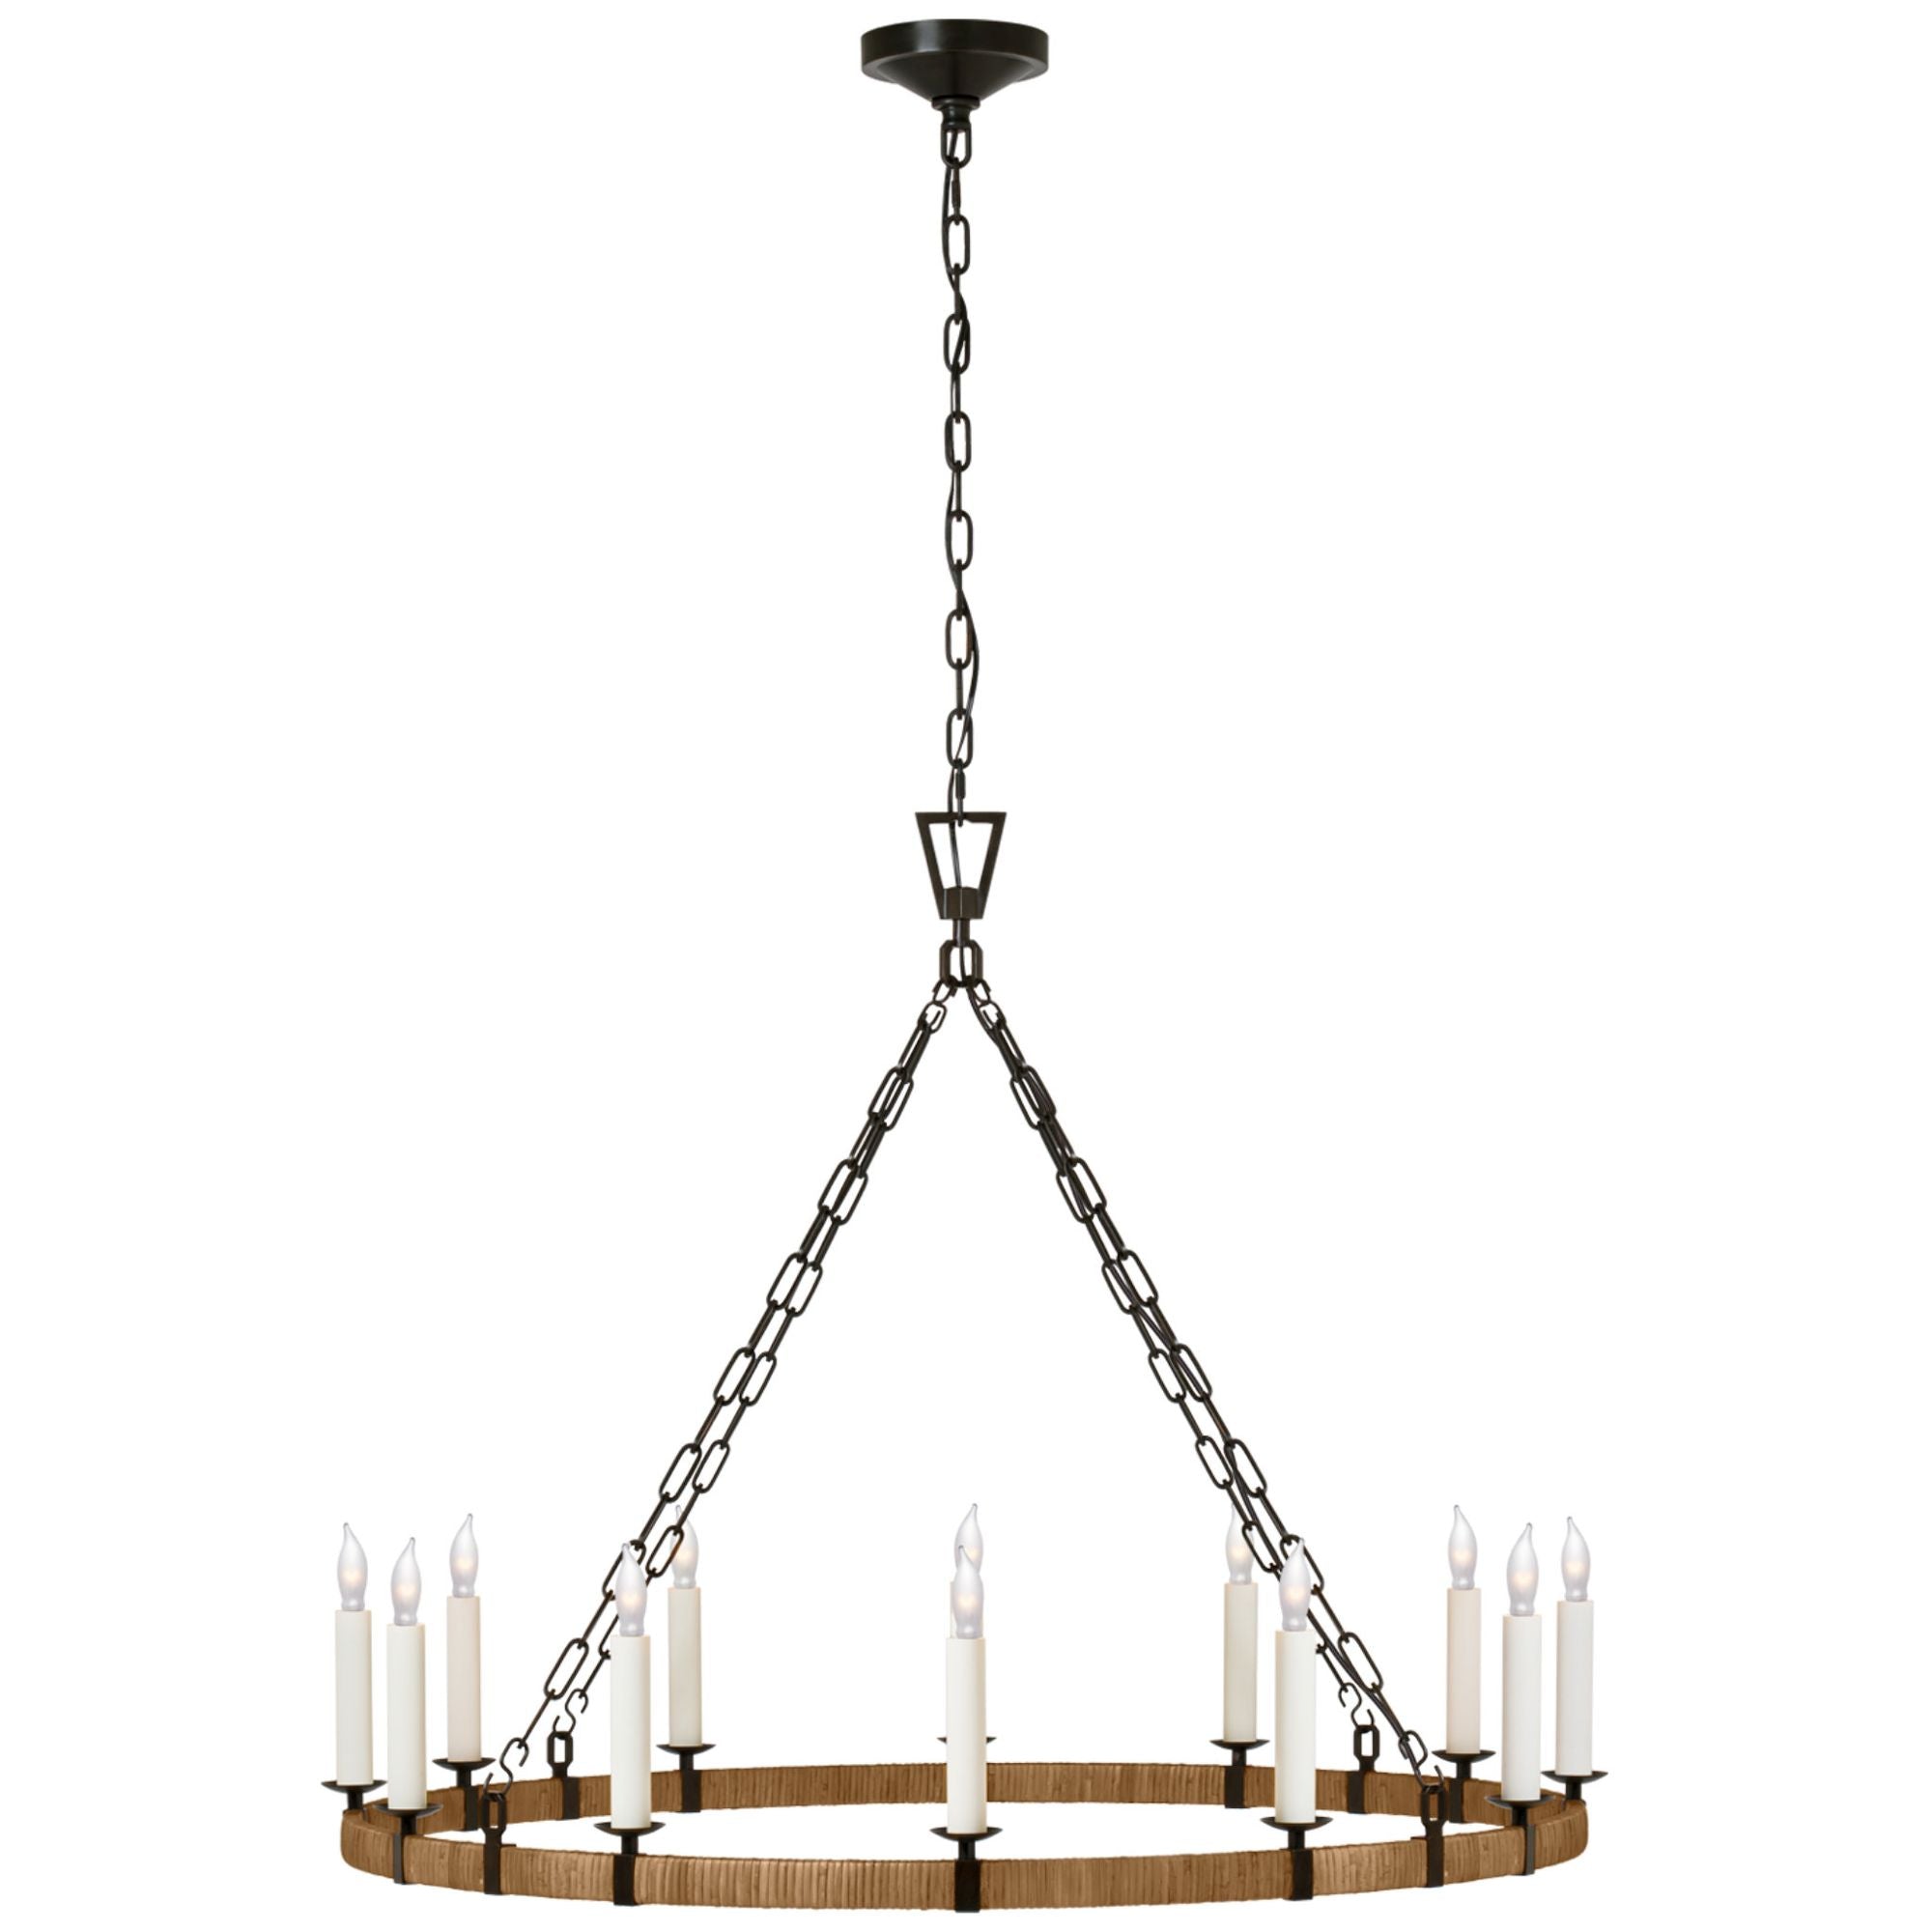 Chapman & Myers Darlana Large Wrapped Ring Chandelier in Aged Iron and Natural Rattan